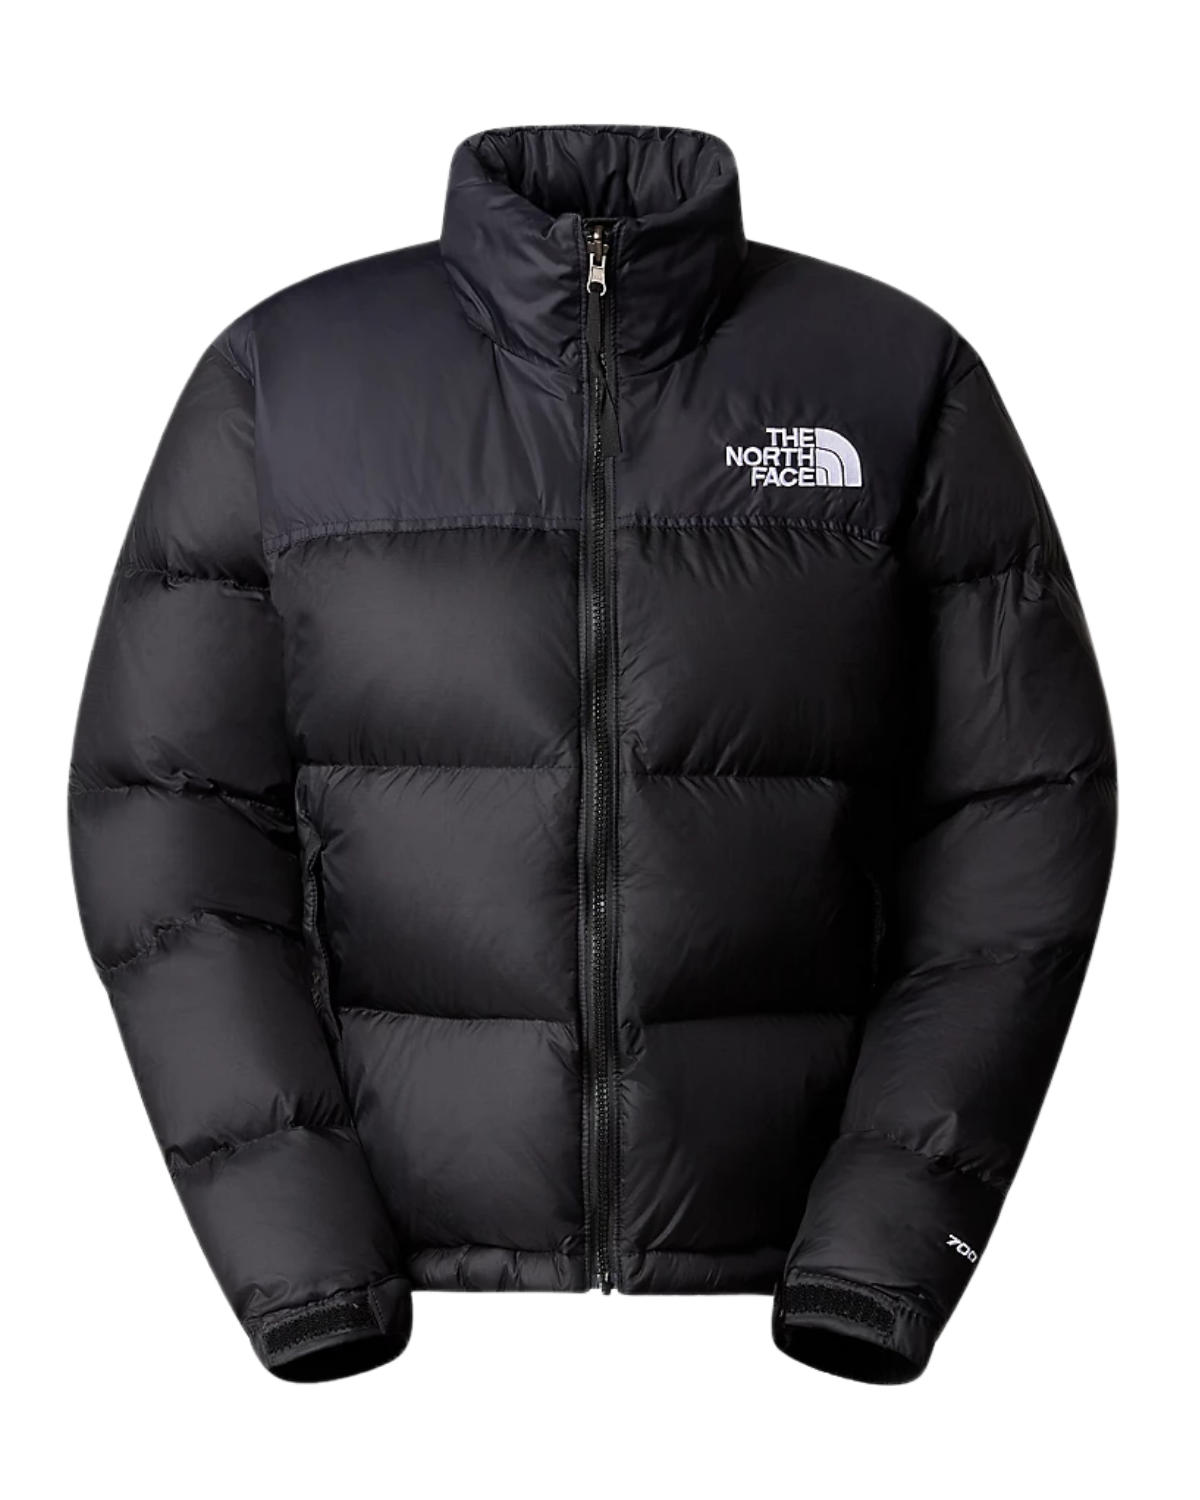 The North Face - Dropsy.Store